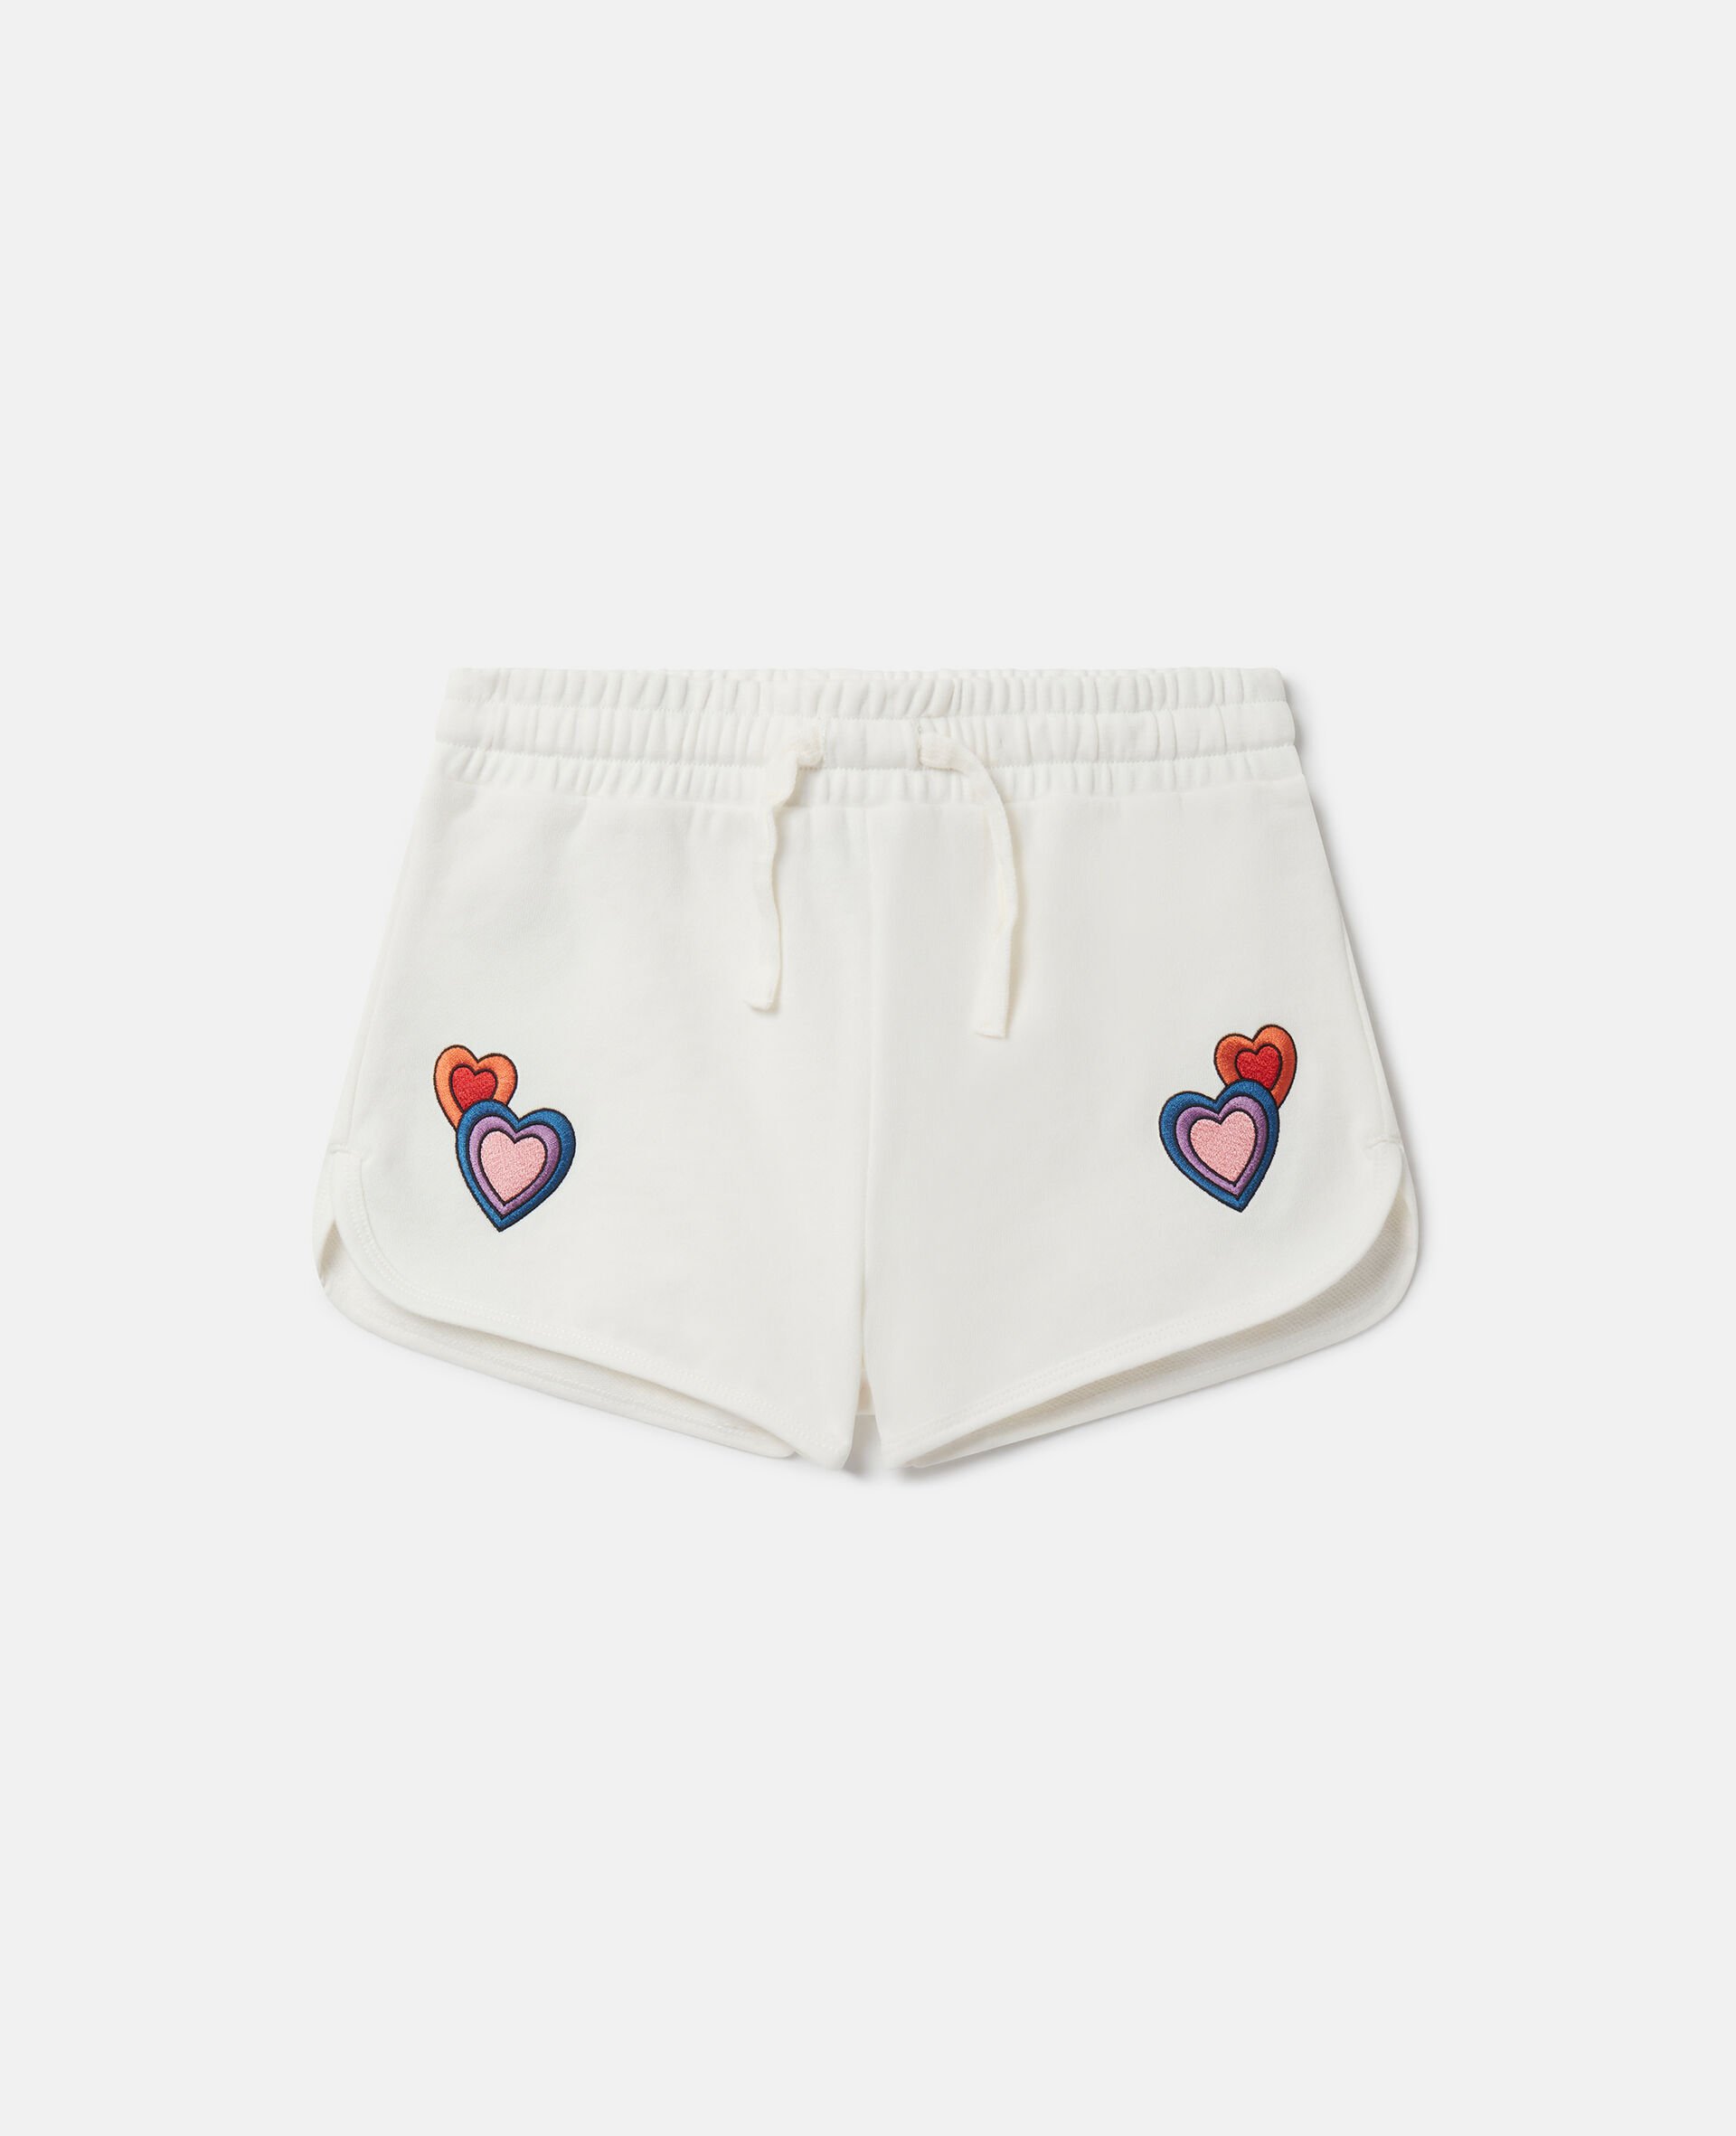 I Love You Embroidered Shorts-Multicolour-large image number 0